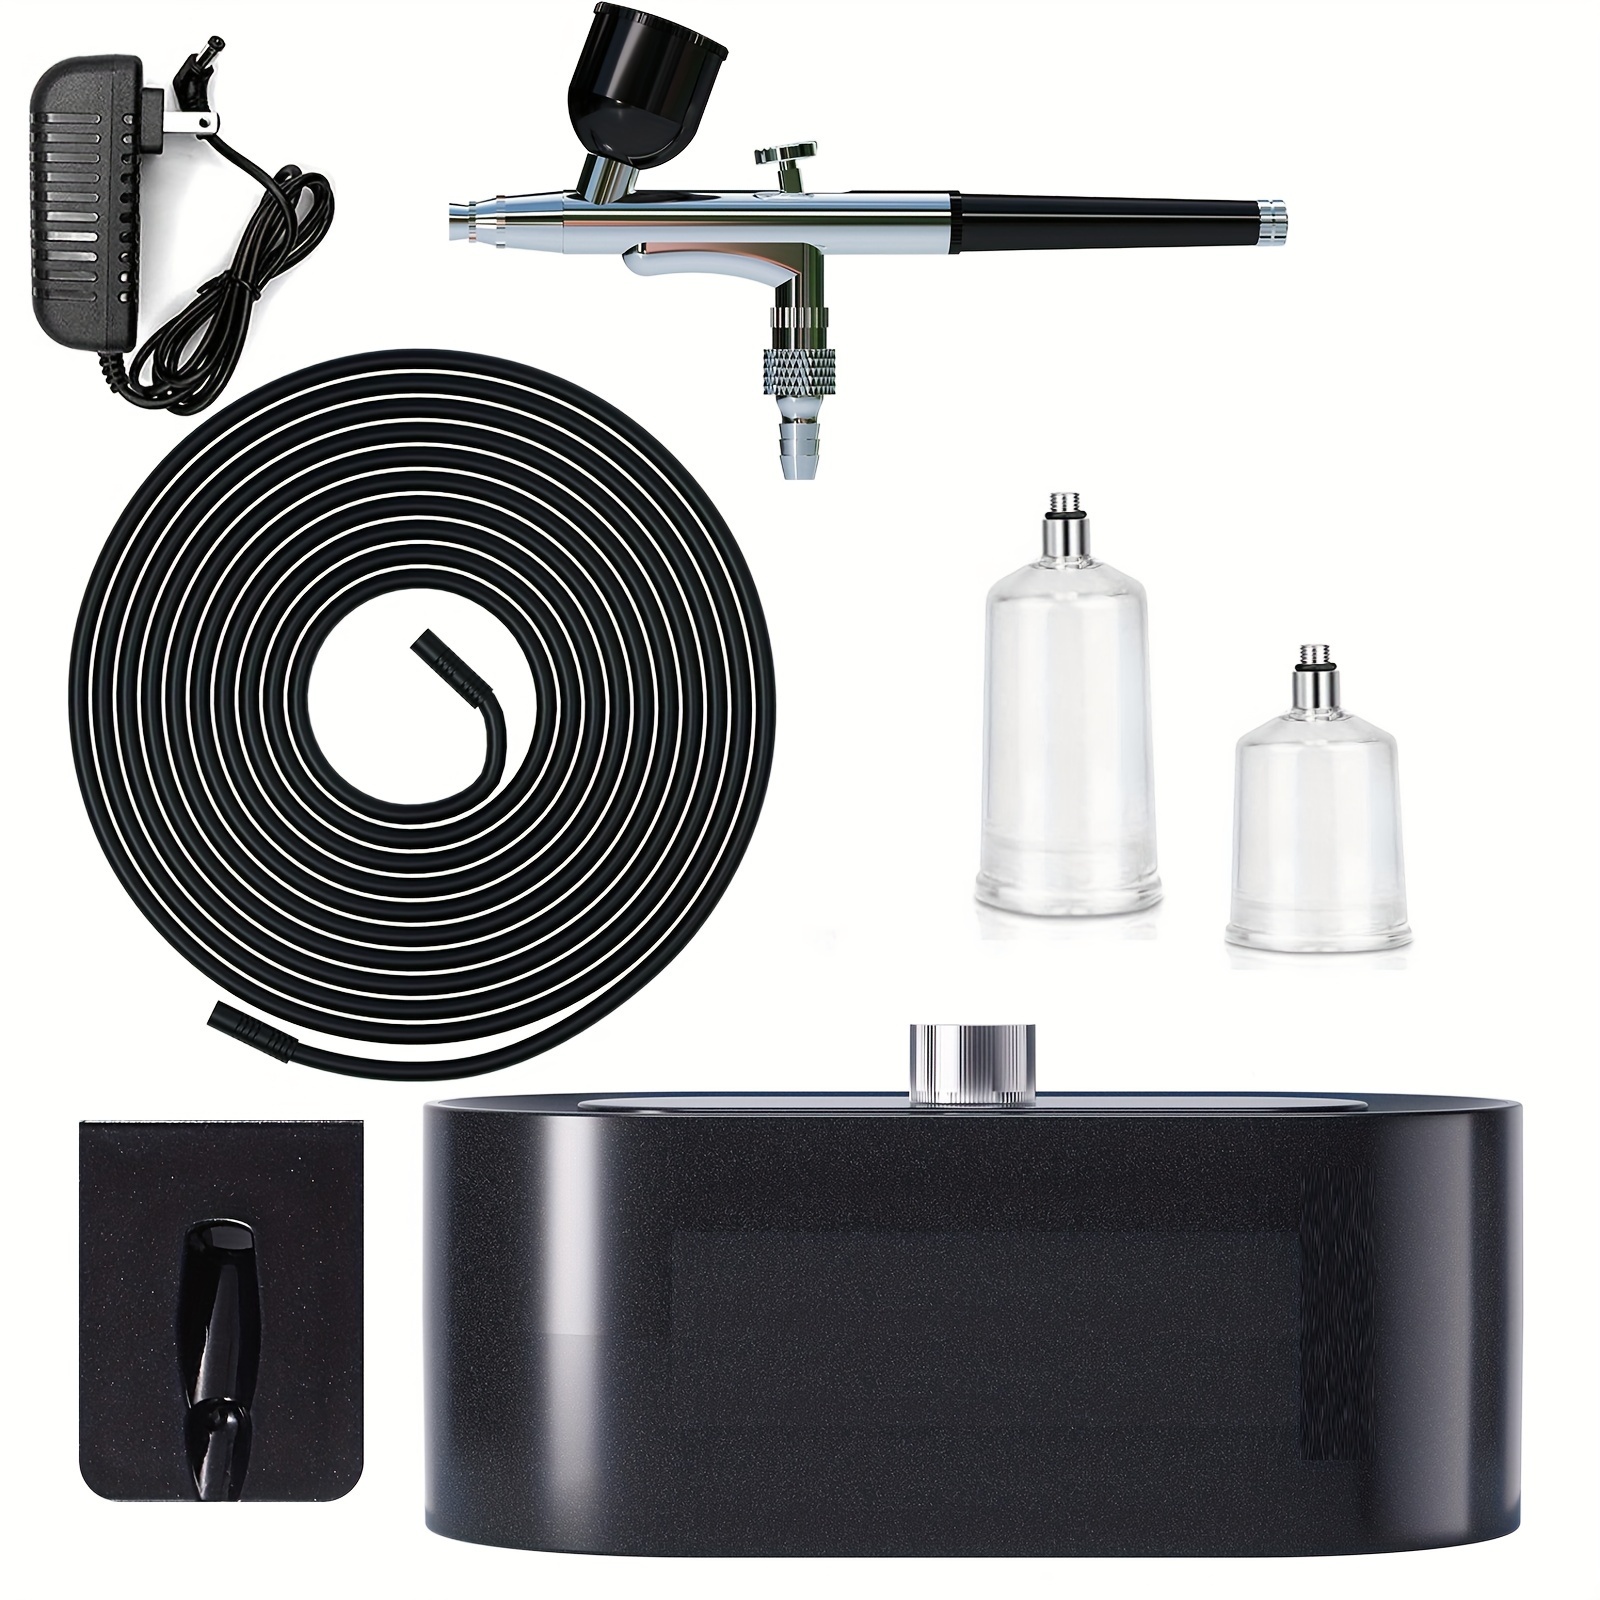 

Airbrush Kit Portable Dual Action Airbrush Gun And Mini Air Compressor Set For Painting, Make Up, Spray Model, Craft, Art Painting, Cake, Manicure, And More